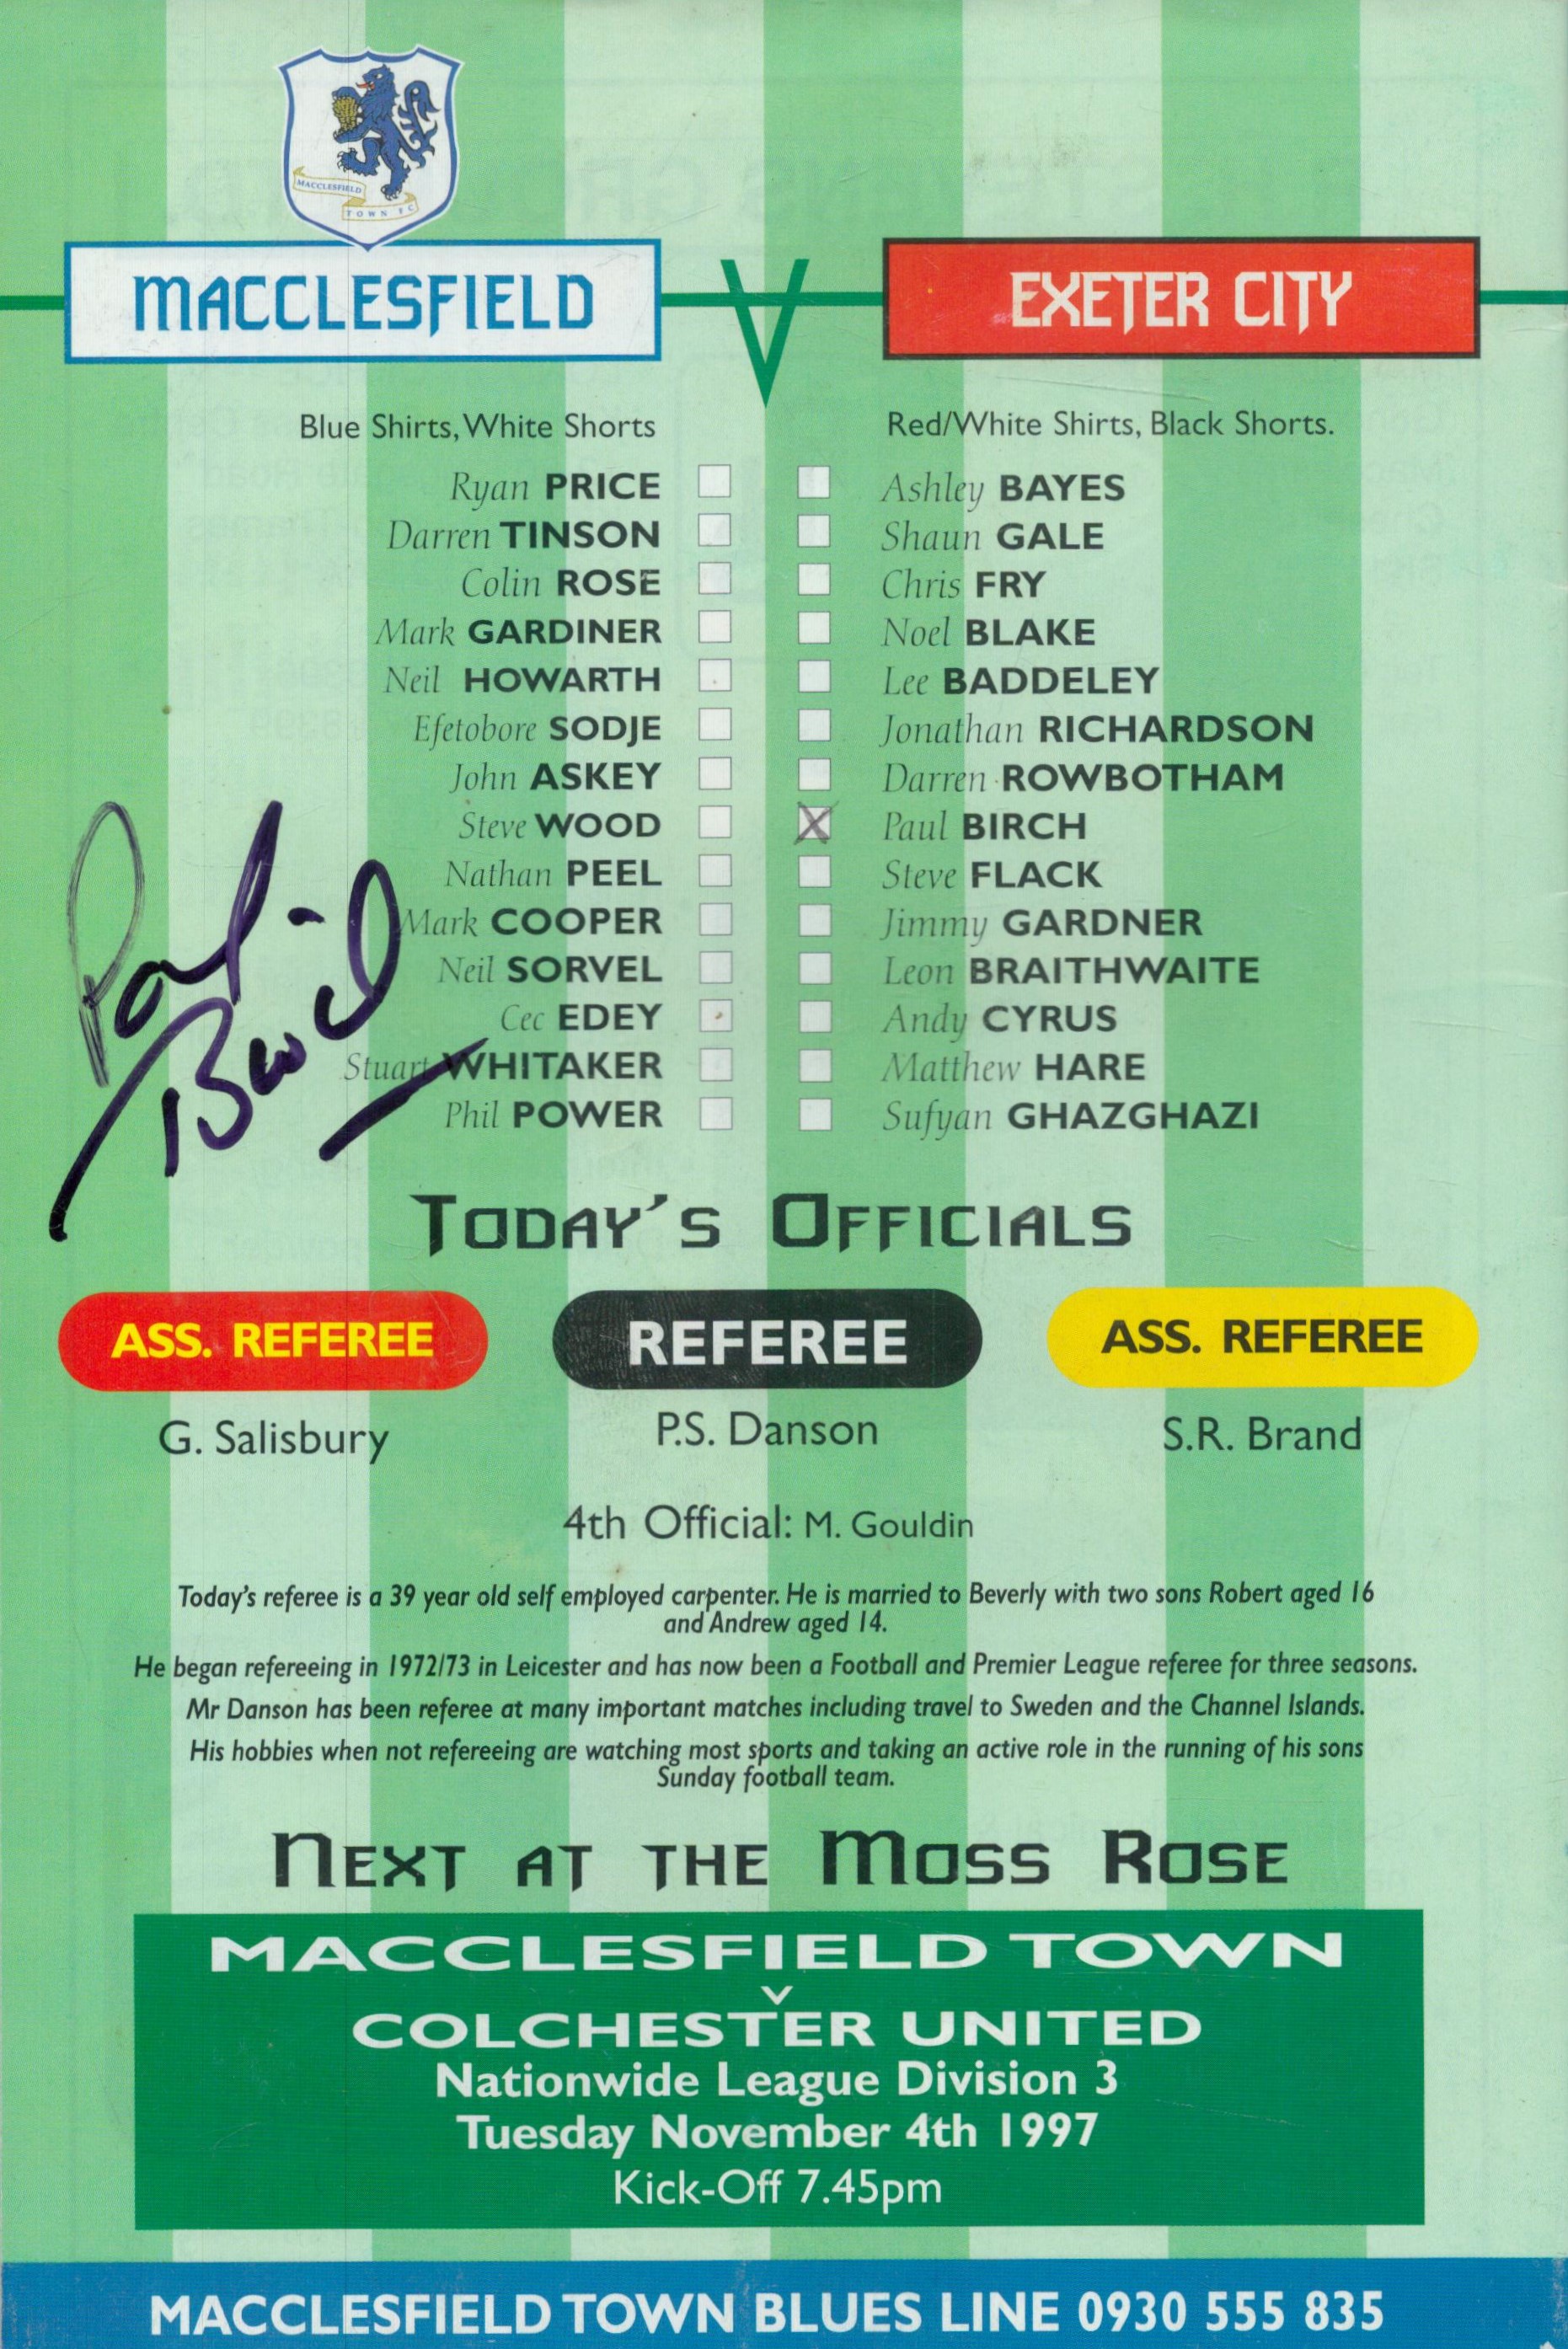 Macclesfield V Exeter City 1997 multi signed programme. Signed by Alan Ball, Sammy Mcilroy, Peter - Image 2 of 2